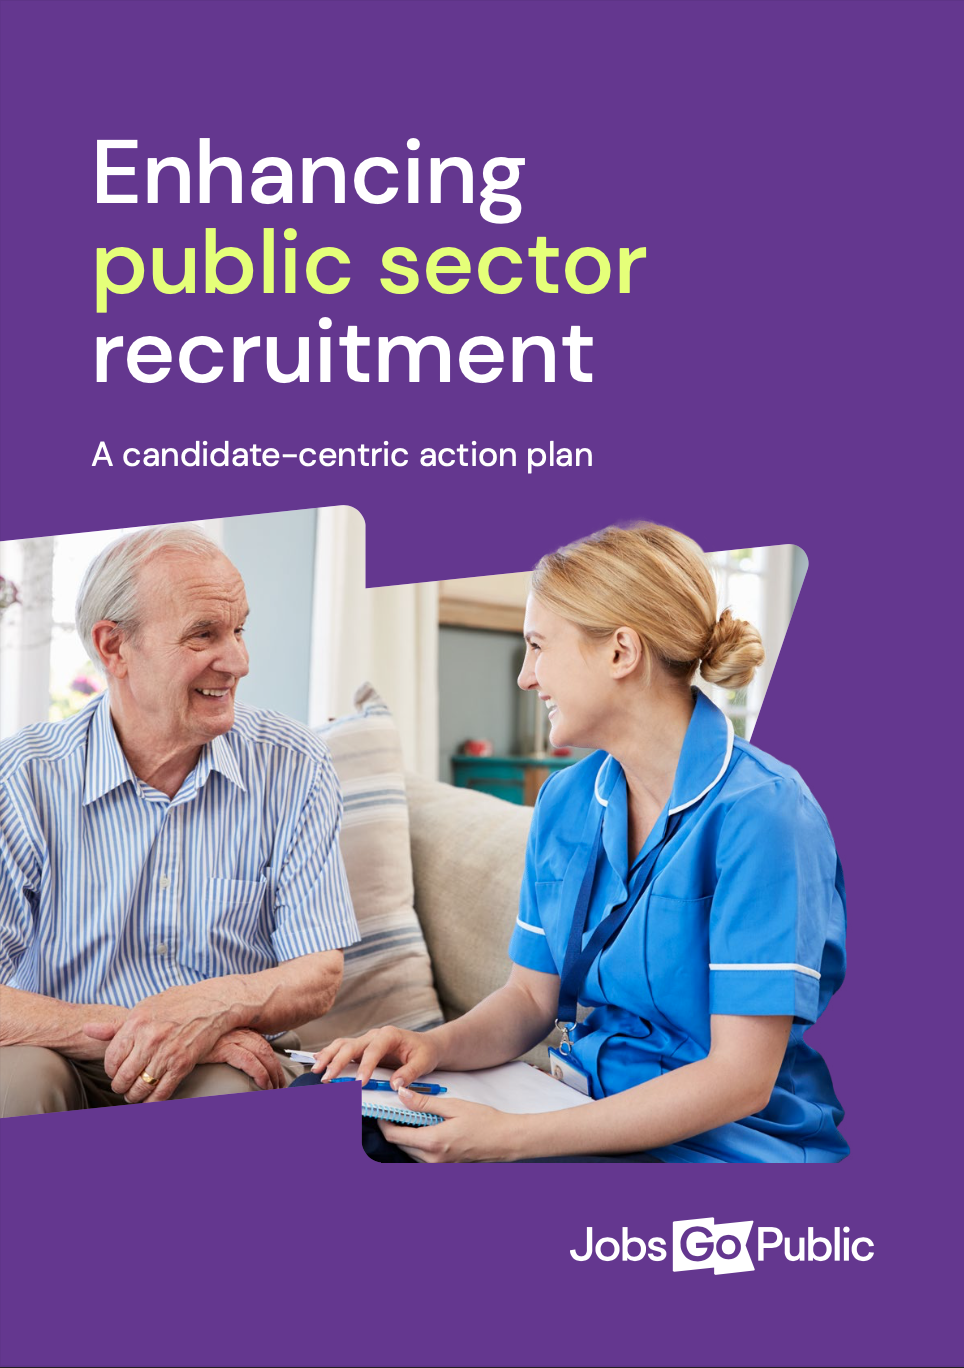 Candidate experience whitepaper cover. Title: Enhancing public sector recruitment: A candidate-centric action plan